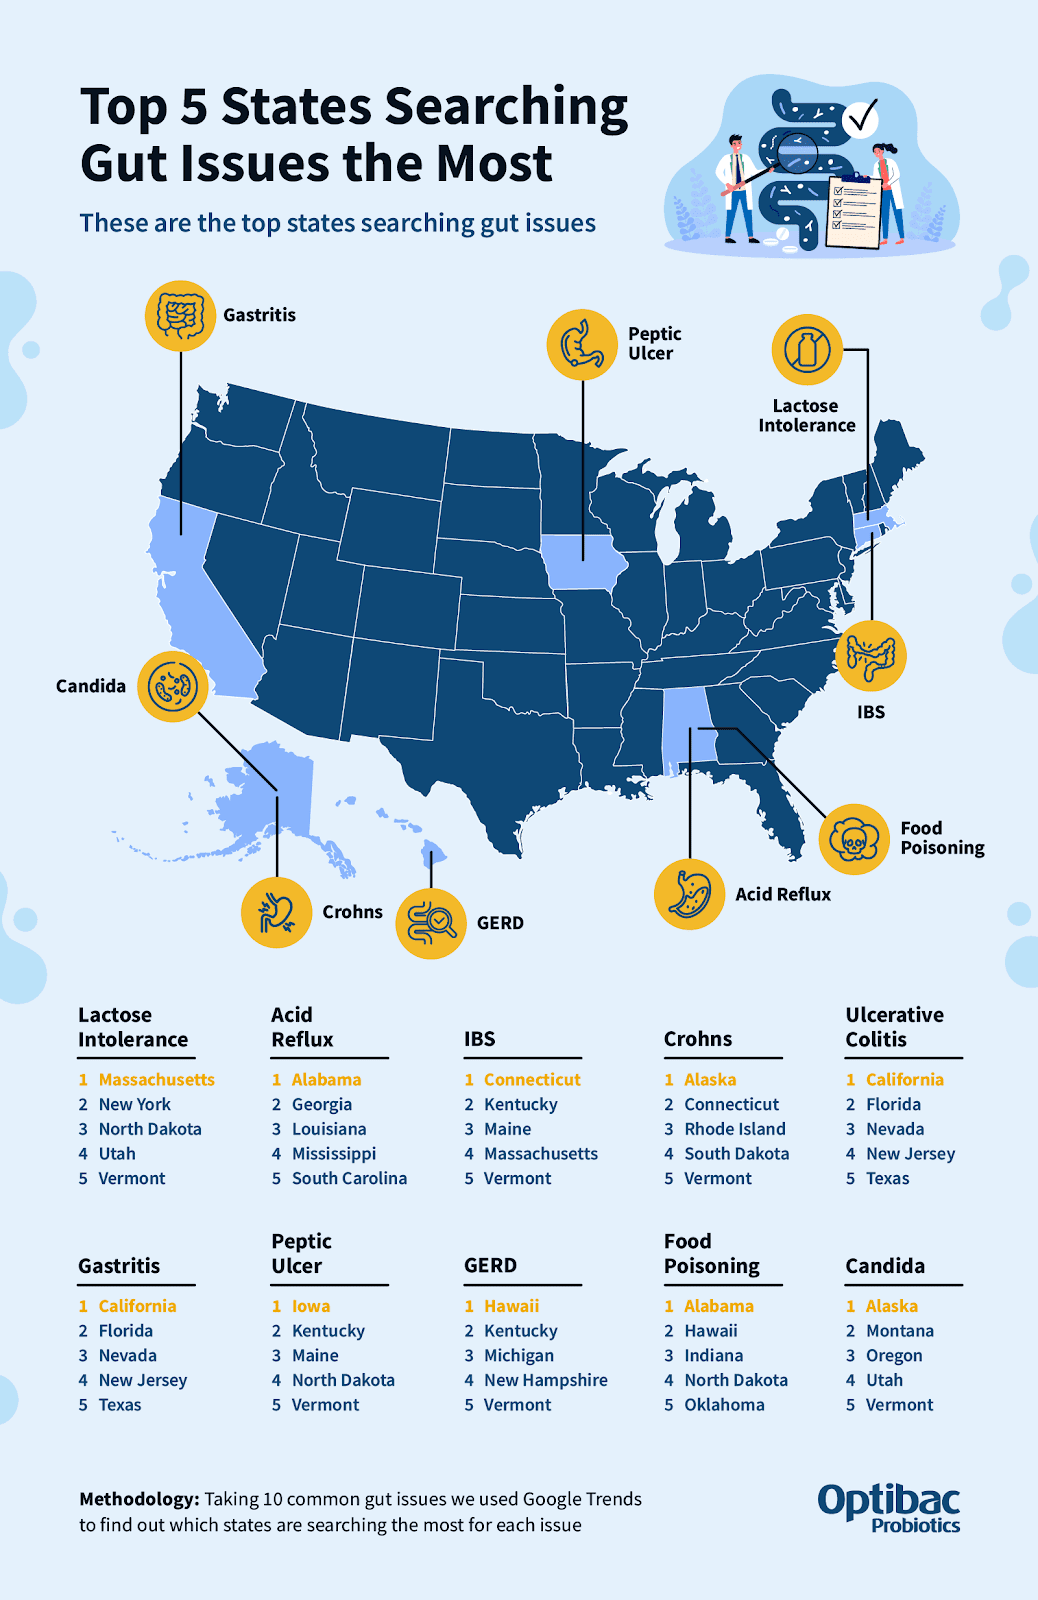 Gut issues by state #2